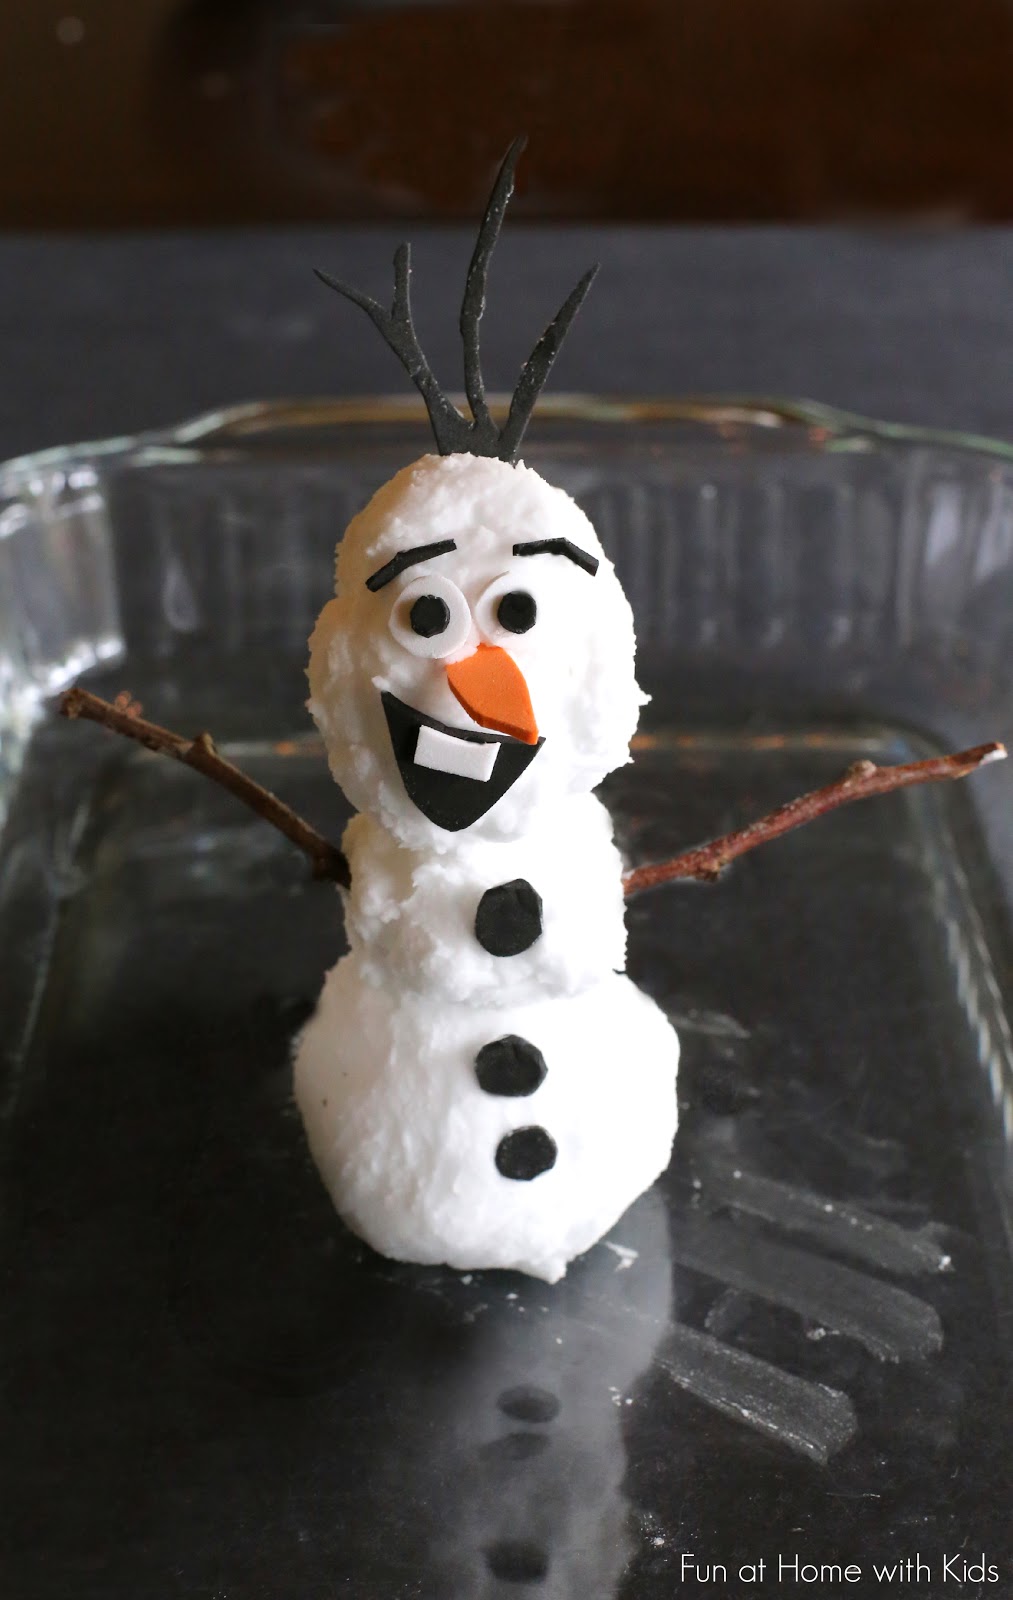 For the FROZEN fans - a Magic Foaming Olaf!  Make Olaf out of Foaming Dough then melt him down to a frothy ice cold foam.  You can use more dough to make him again!  Lots of silly fun!  From Fun at Home with Kids